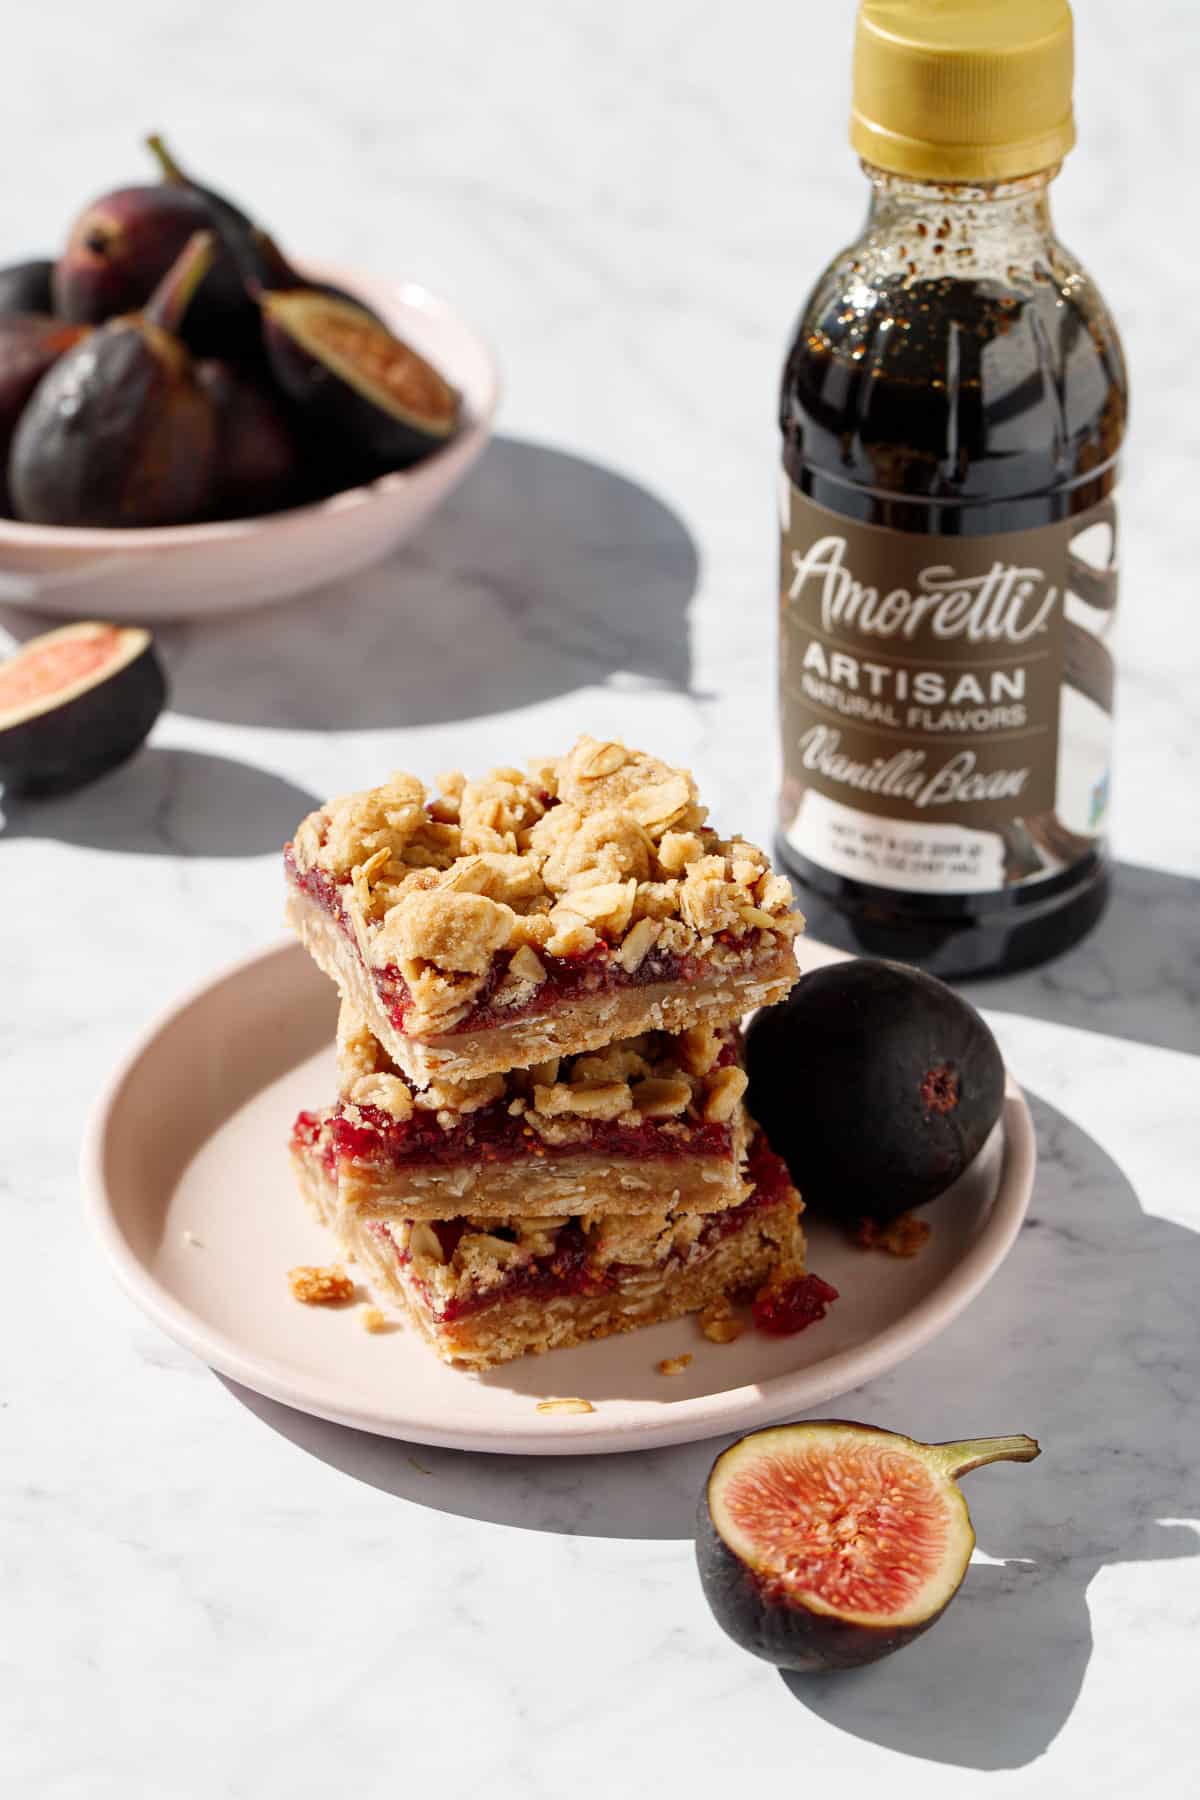 Plate with stack of three Fig, Apple & Vanilla Crumb Bars, with a bowl of fresh figs and one cut fig in the foreground, bottle of Amoretti Vanilla Artisan flavor in the background.